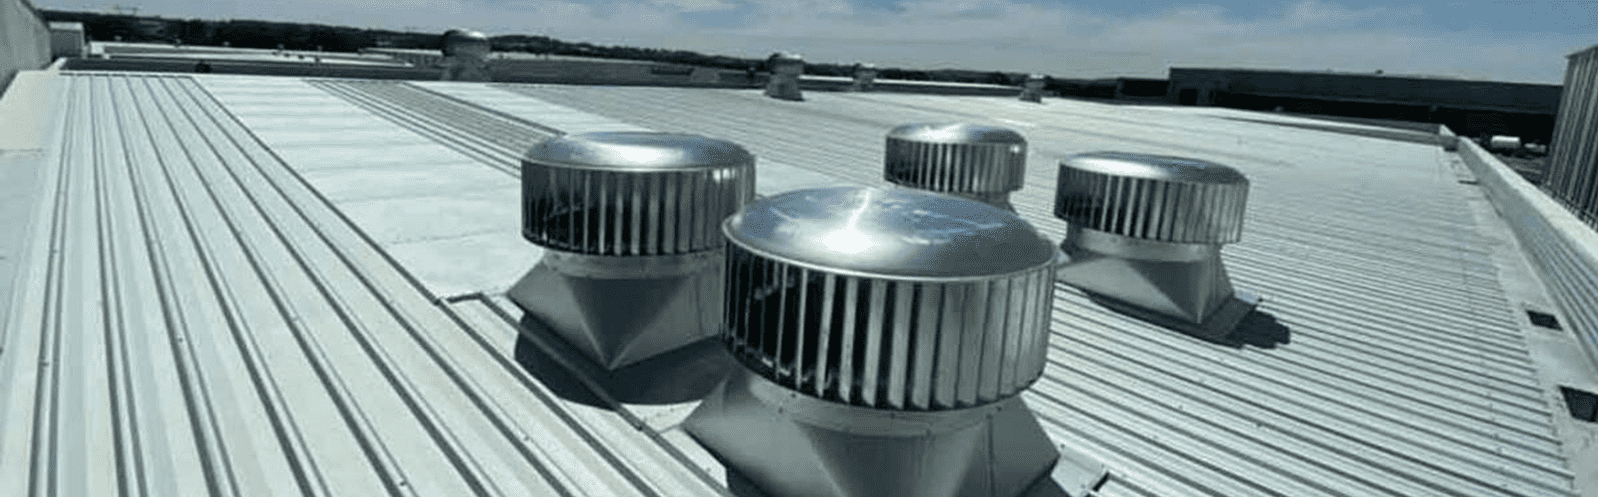 whirlybirds on a metal roof in Adelaide